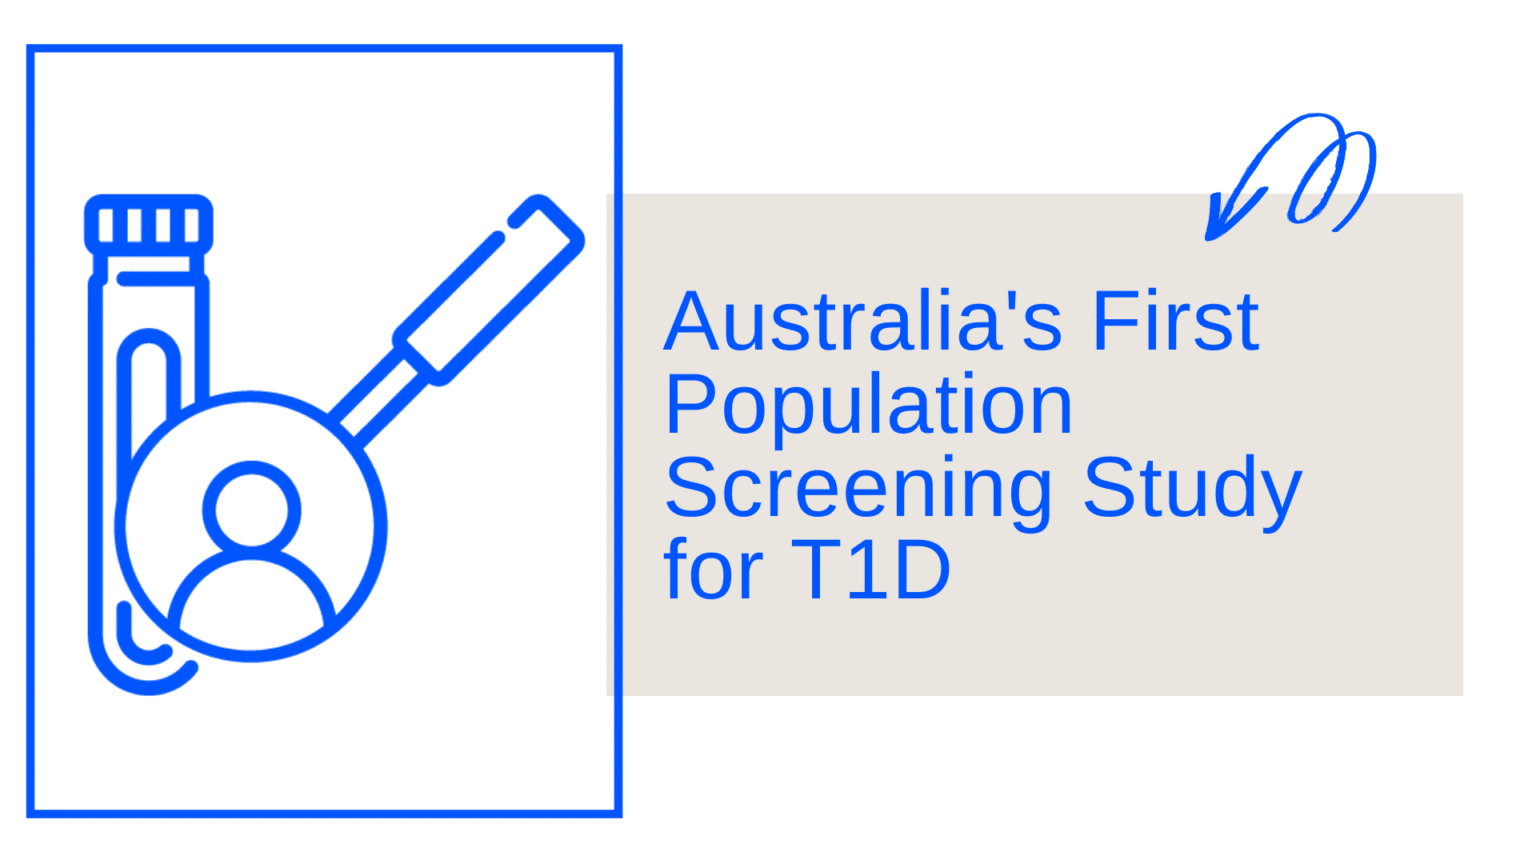 JDRF Announces Australia’s First Population Screening Study for T1D